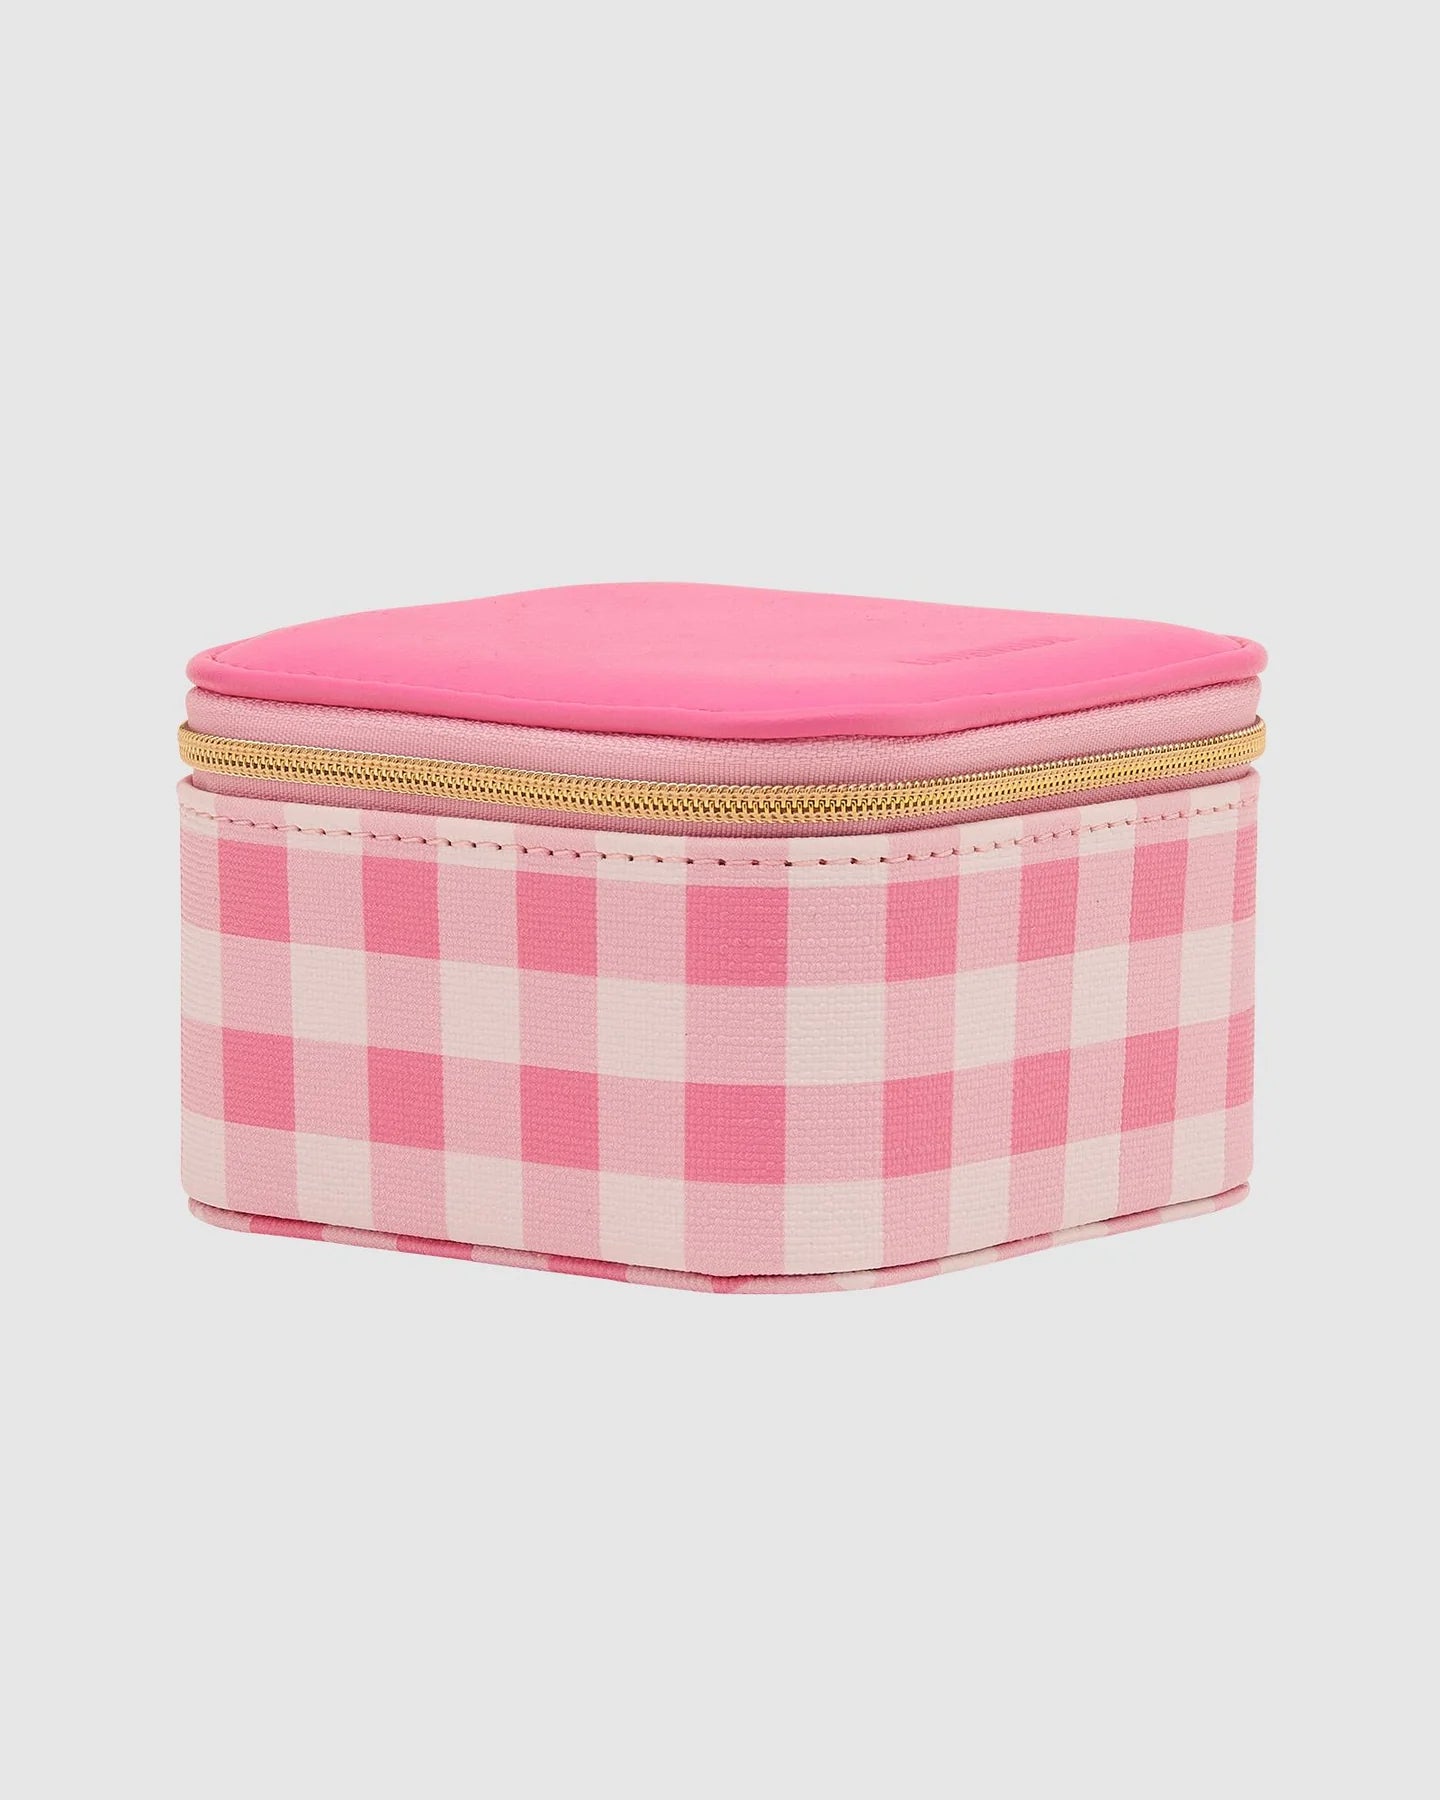 Beau Jewellery Box in Pink Gingham by Louenhide